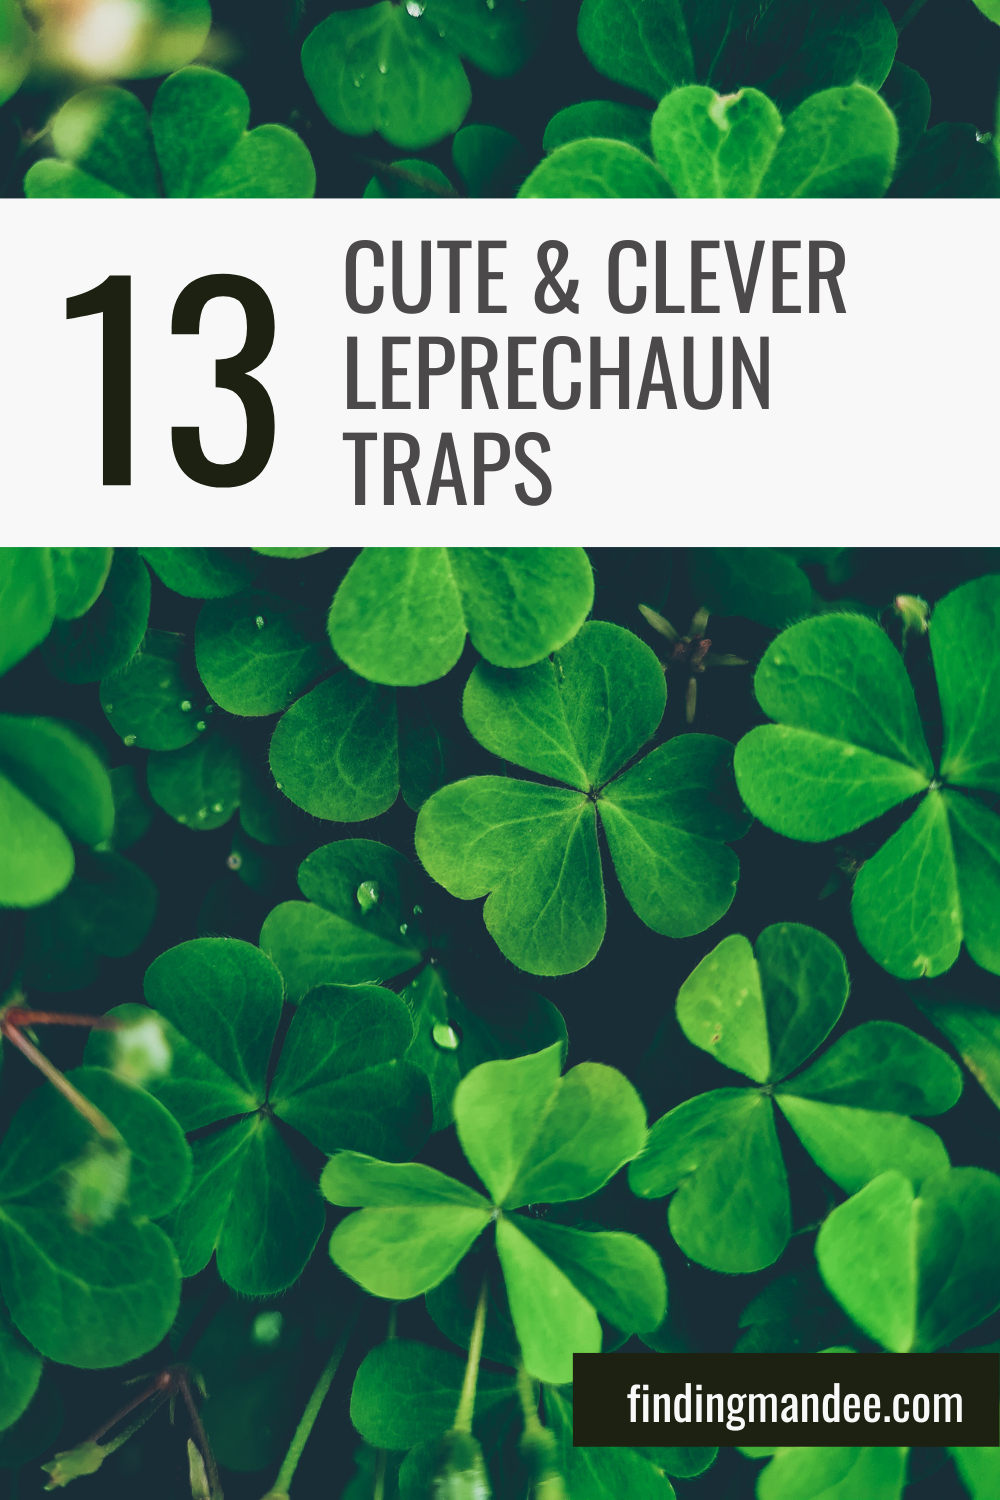 13 Cute and Clever Leprechaun Traps for Your School Project | Finding Mandee